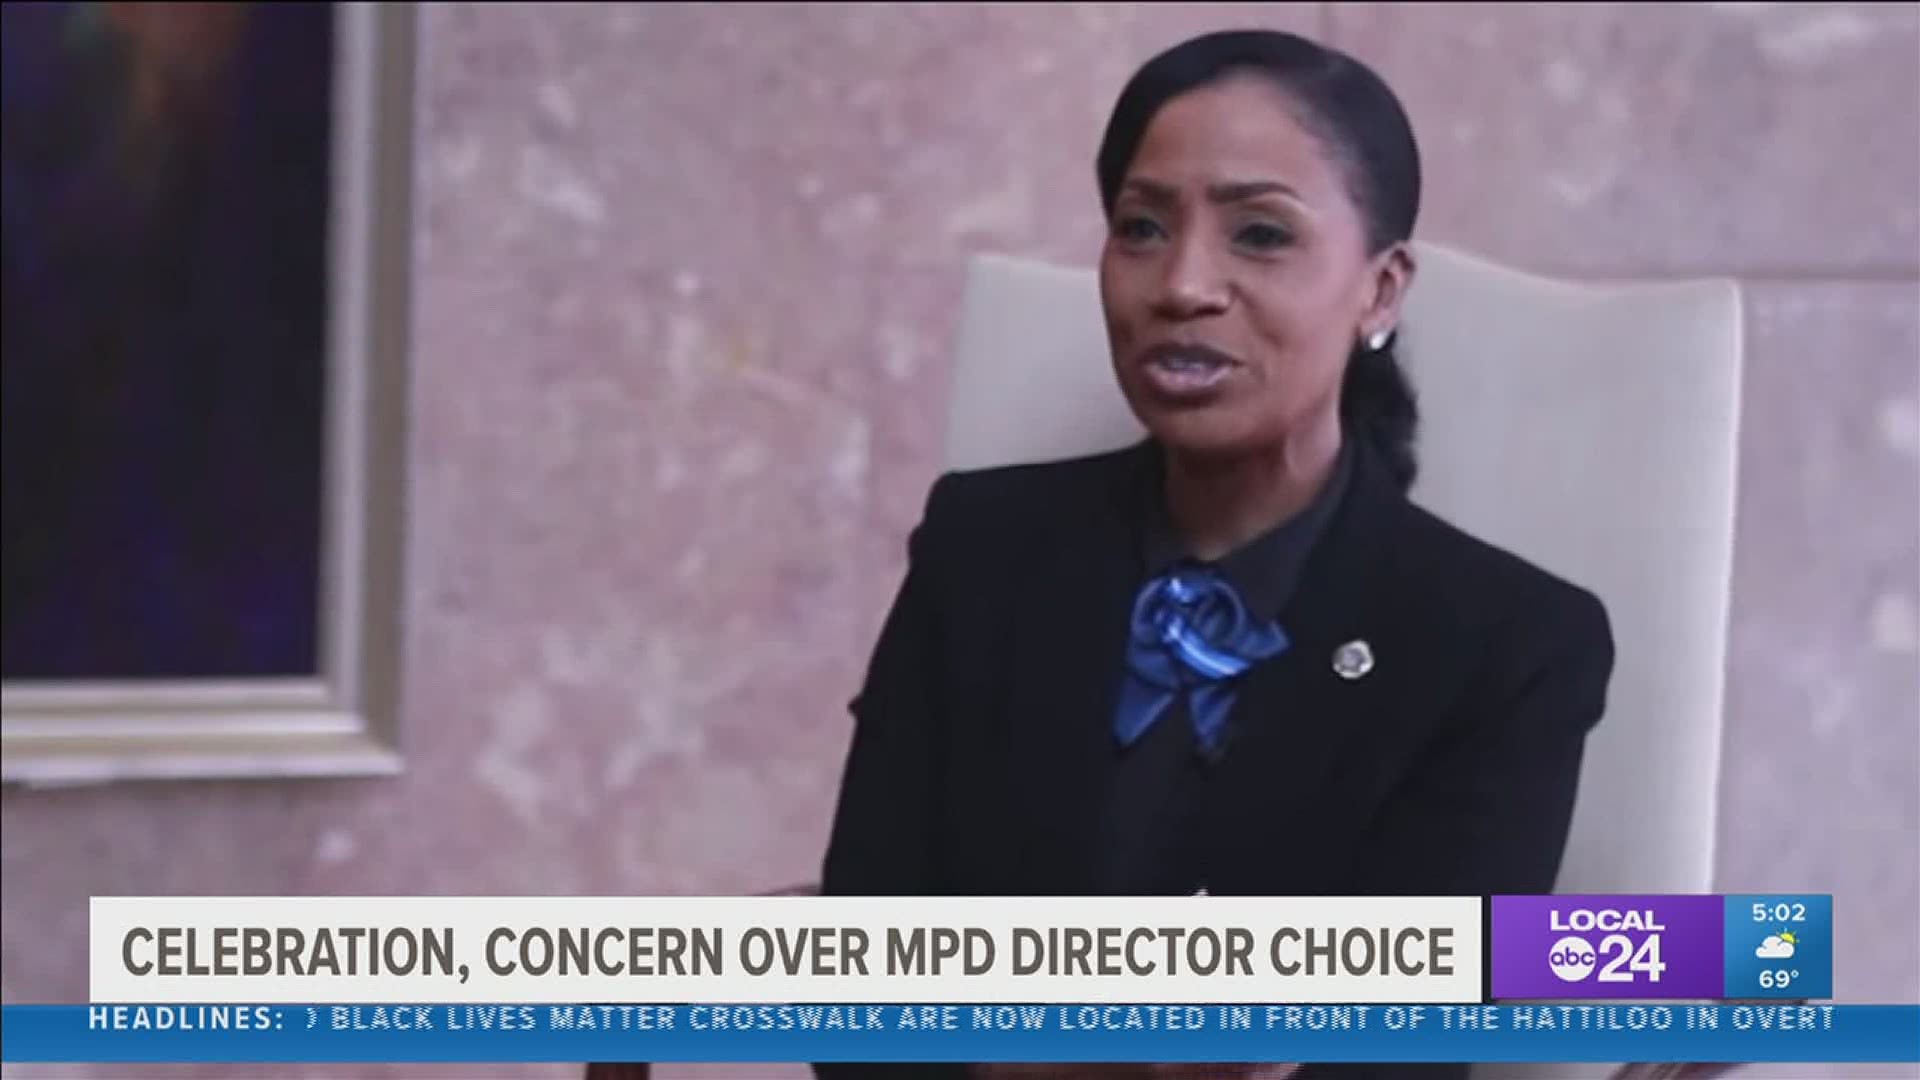 The Durham, NC police chief chosen by Memphis Mayor Jim Strickland ahead of three internal MPD director finalists.